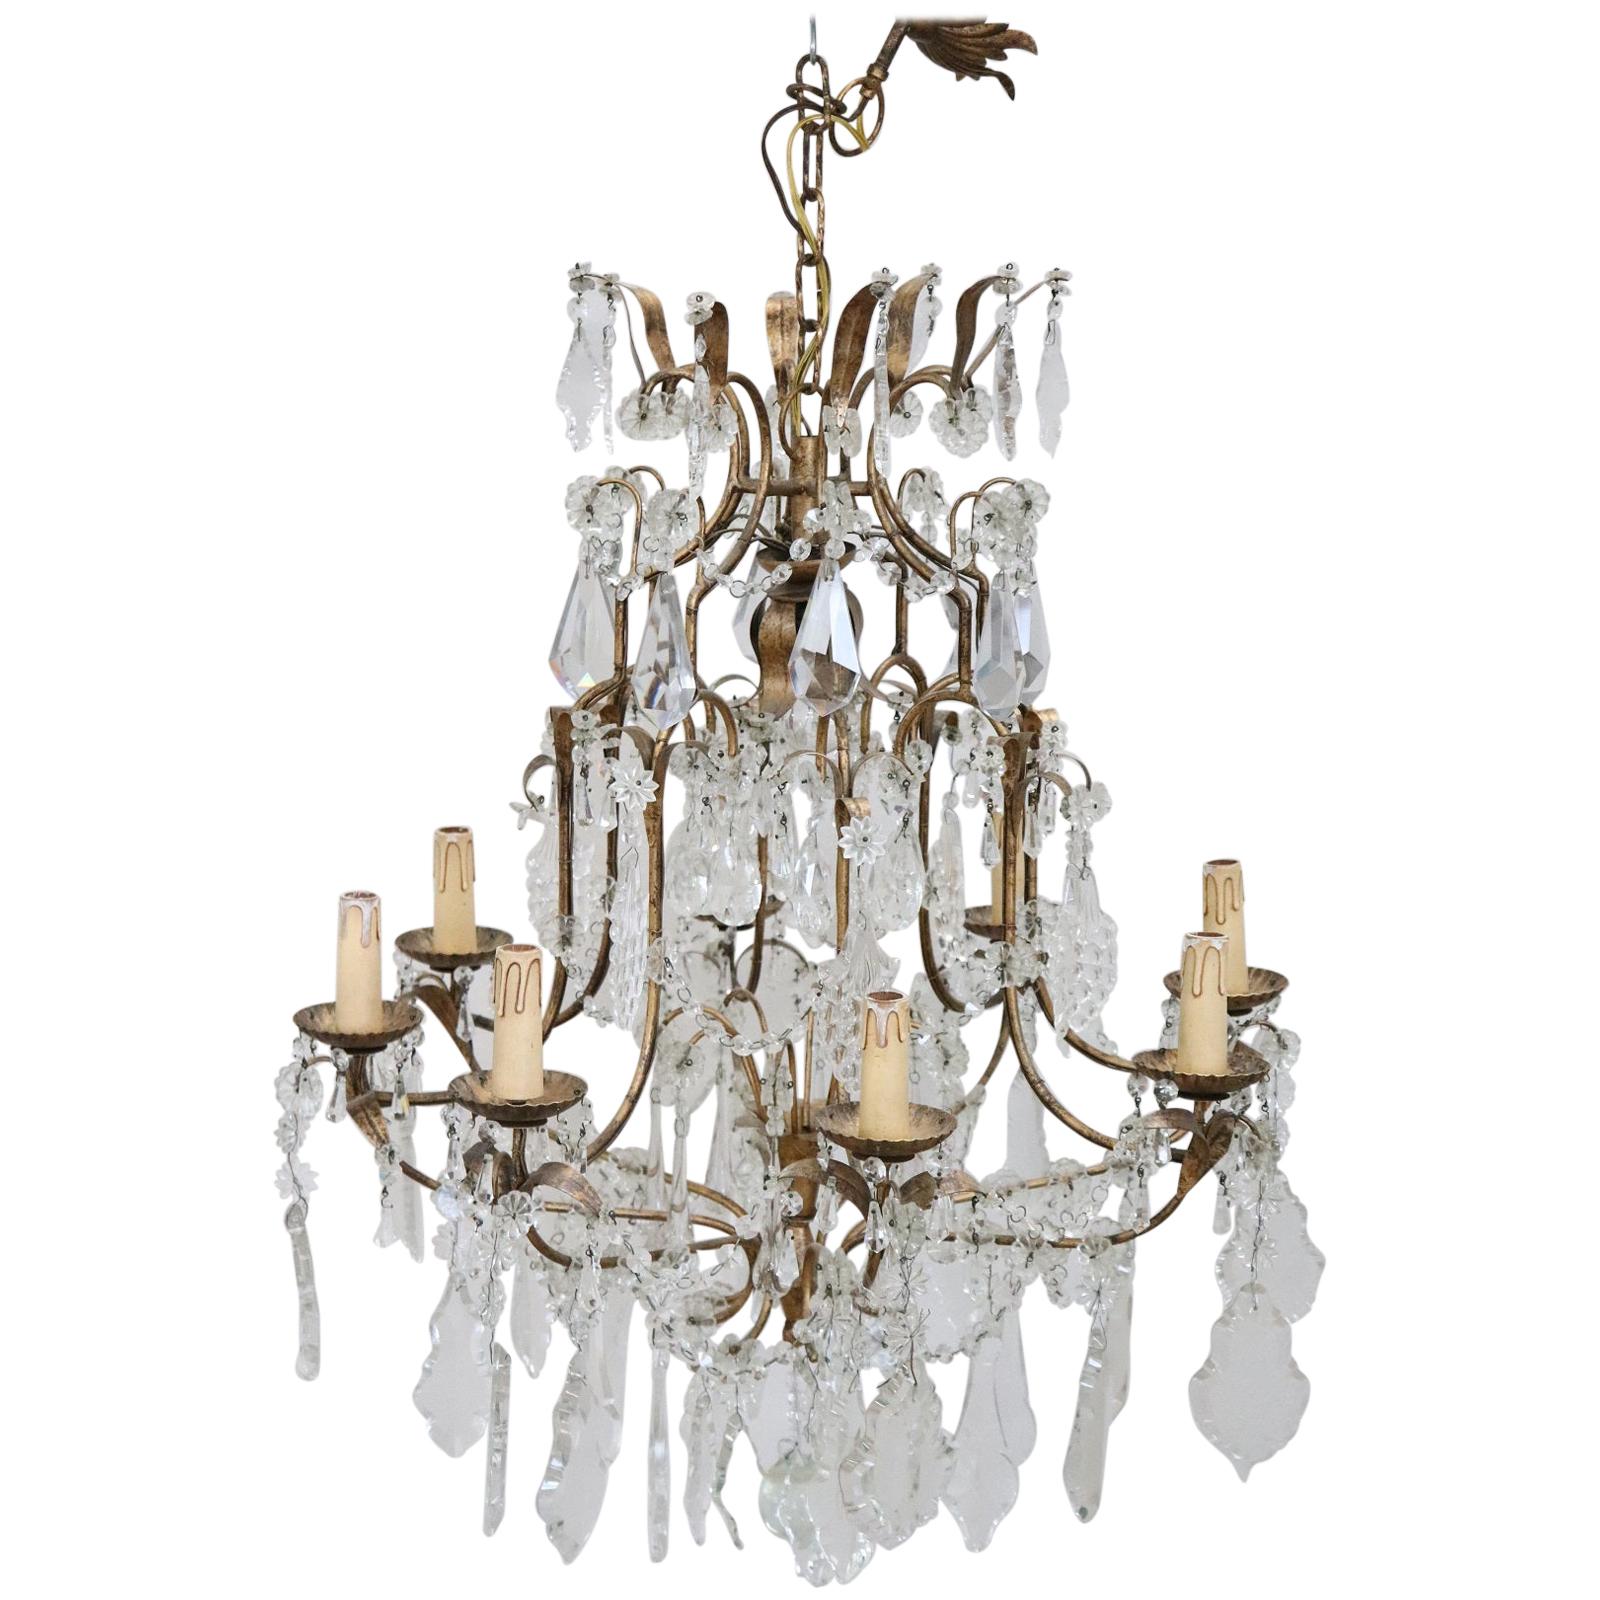 20th Century Louis XVI Style Gilded Bronze and Crystals Chandelier For Sale